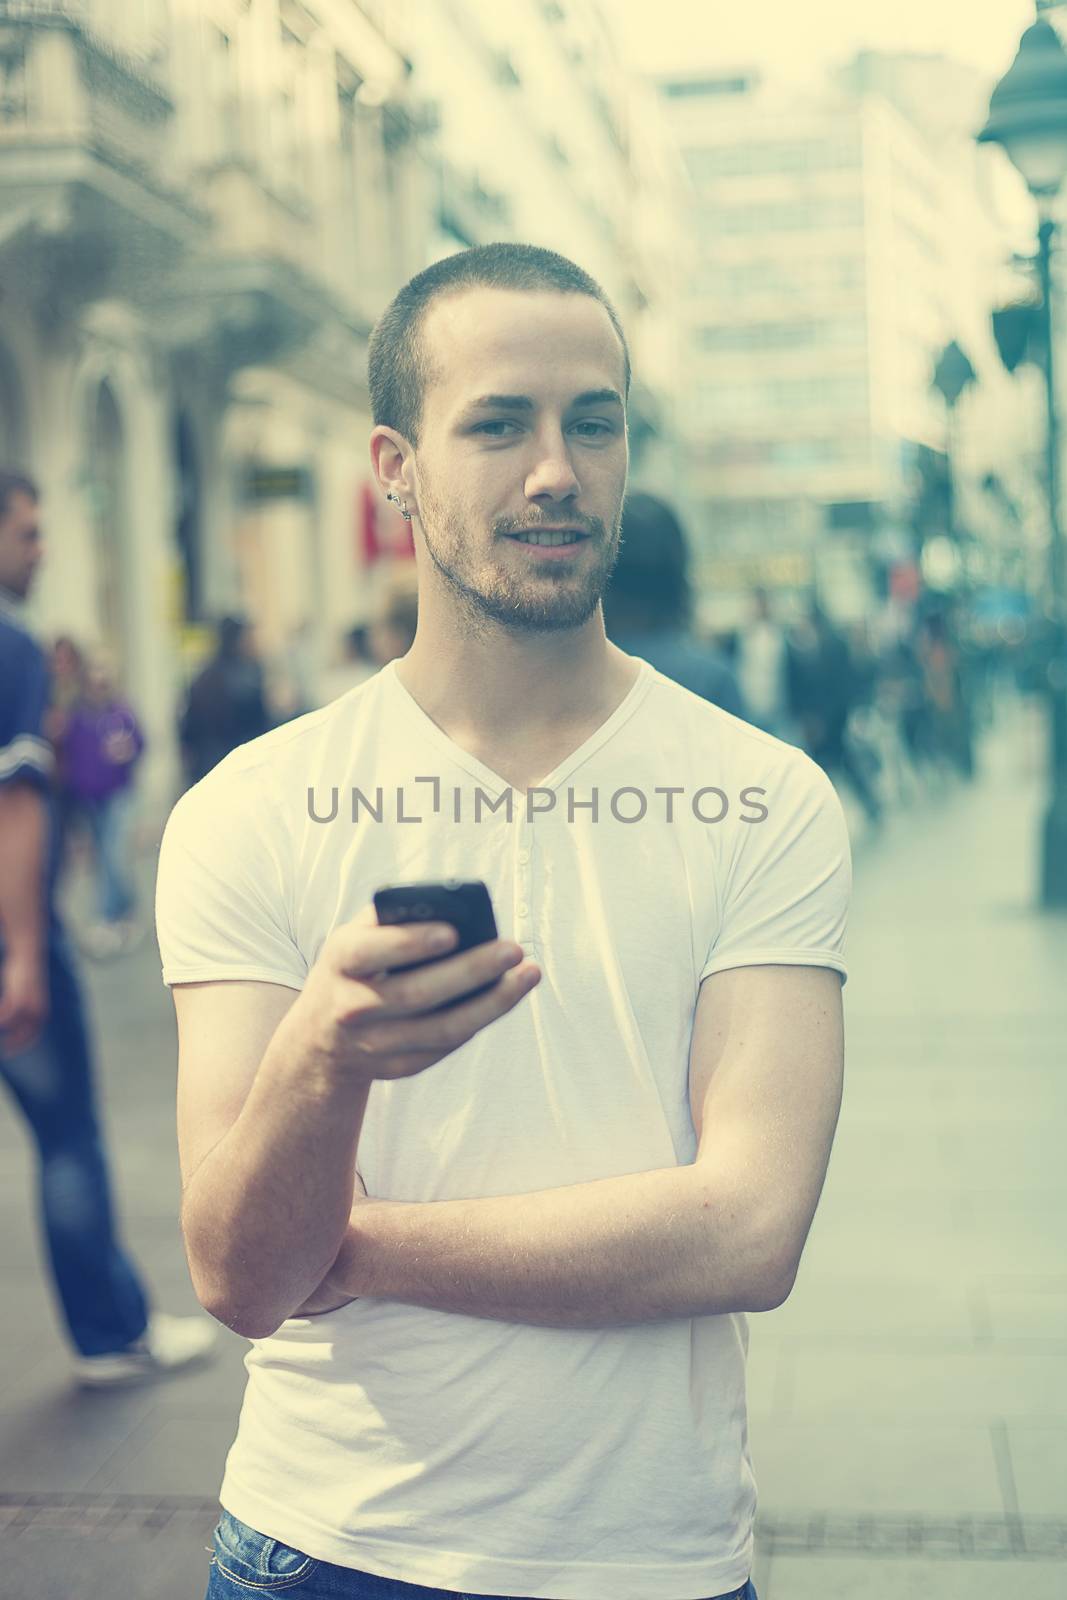 Young Man with mobile phone walking, background is blured city